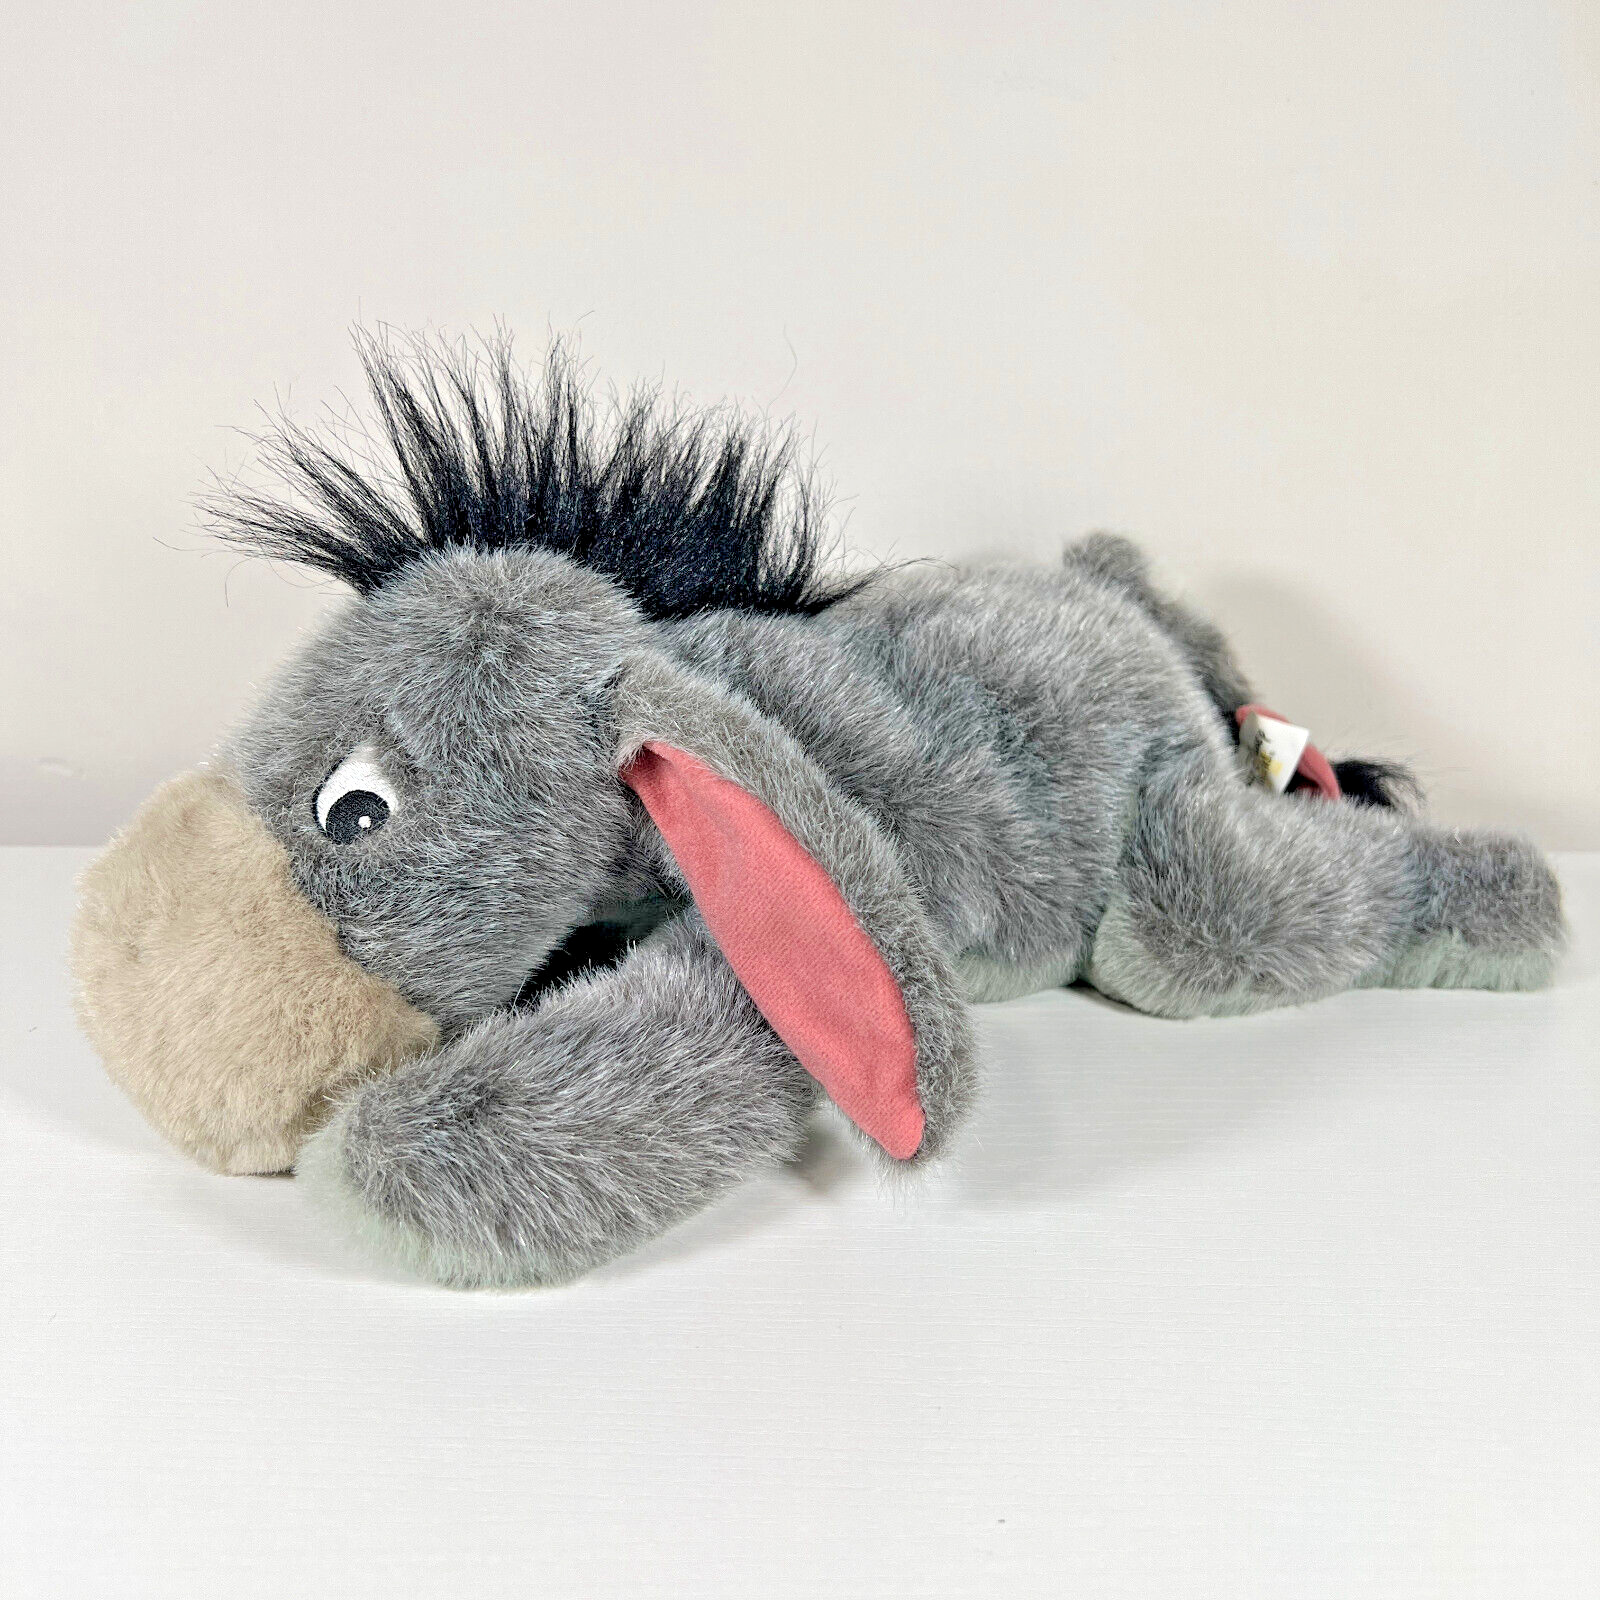 Disney Eeyore from Winnie the Pooh 16” Gray Fluffy Plush with Detachable Tail